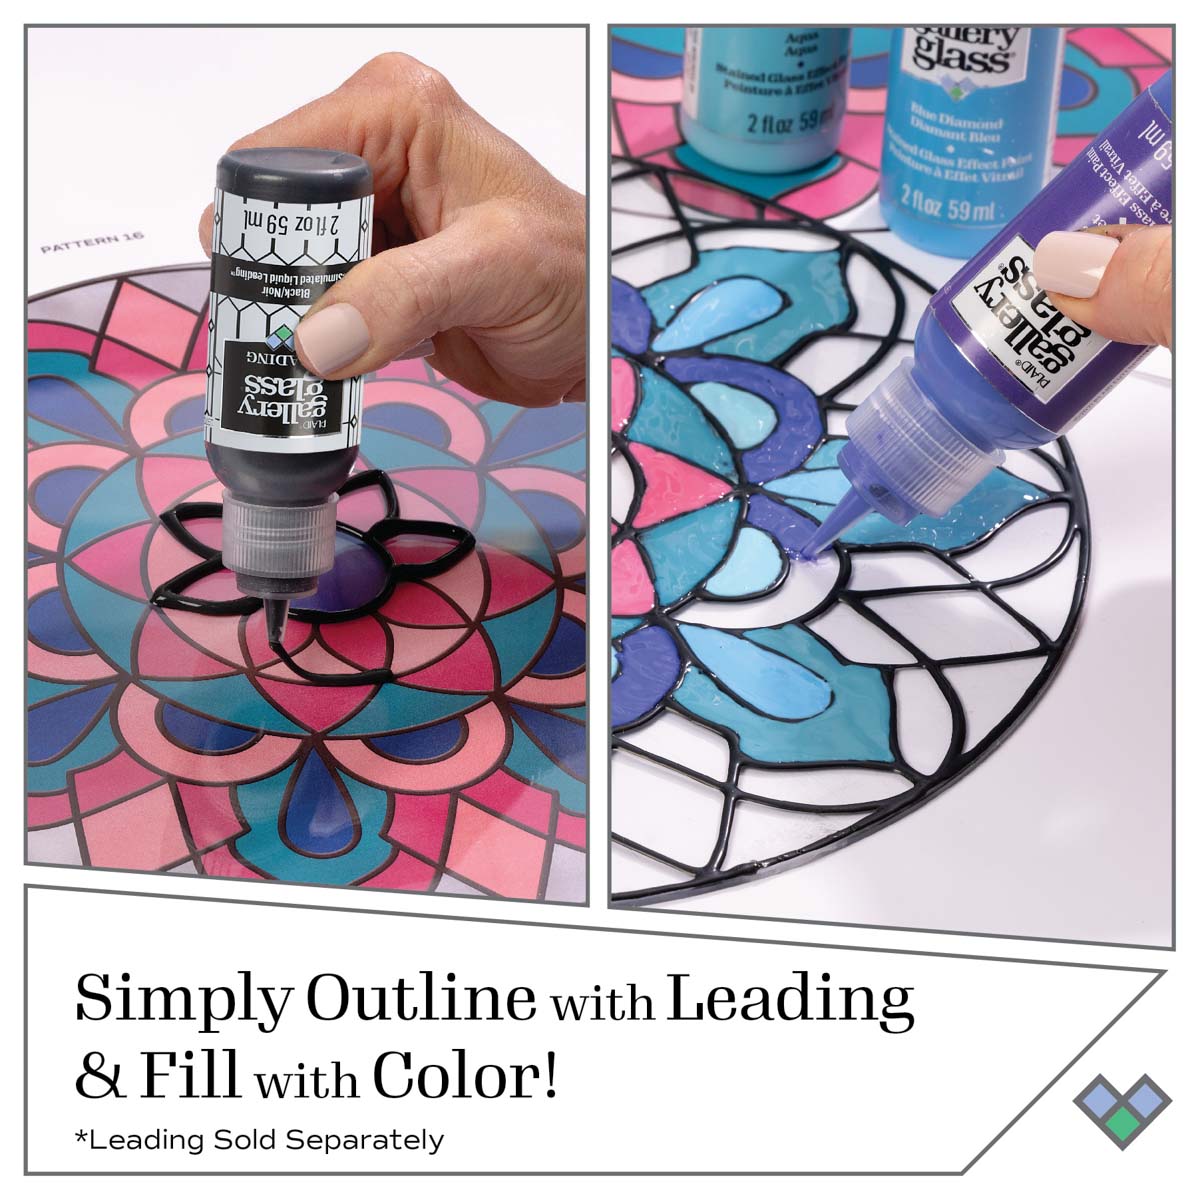 Gallery Glass ® Stained Glass Effect Paint - Lime Green, 2 oz. - 19710